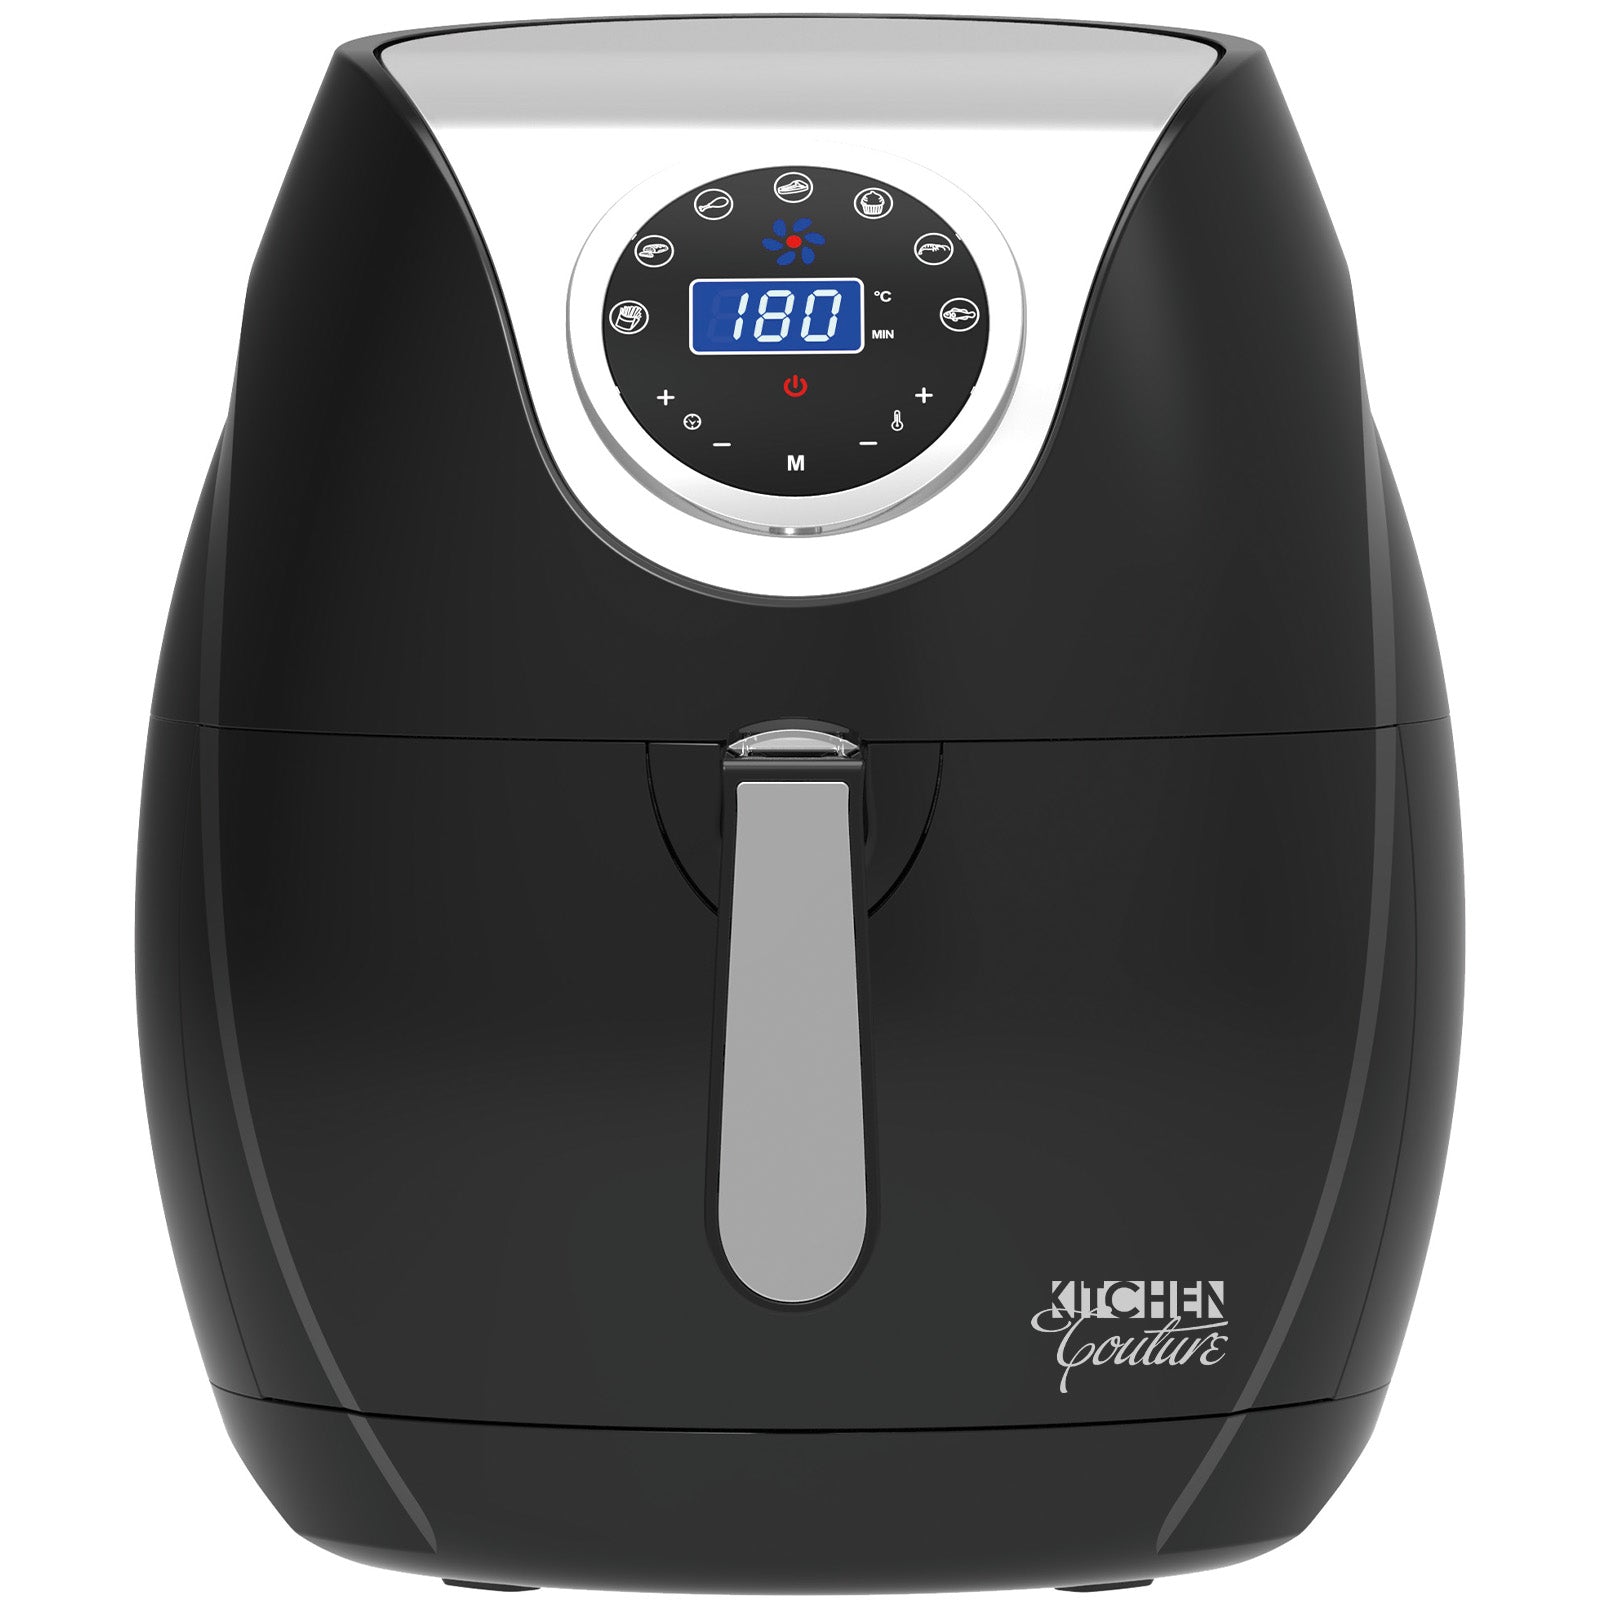 Kitchen Couture Digital Air Fryer 7L LED Display Low Fat Healthy Oil Free Black - SILBERSHELL